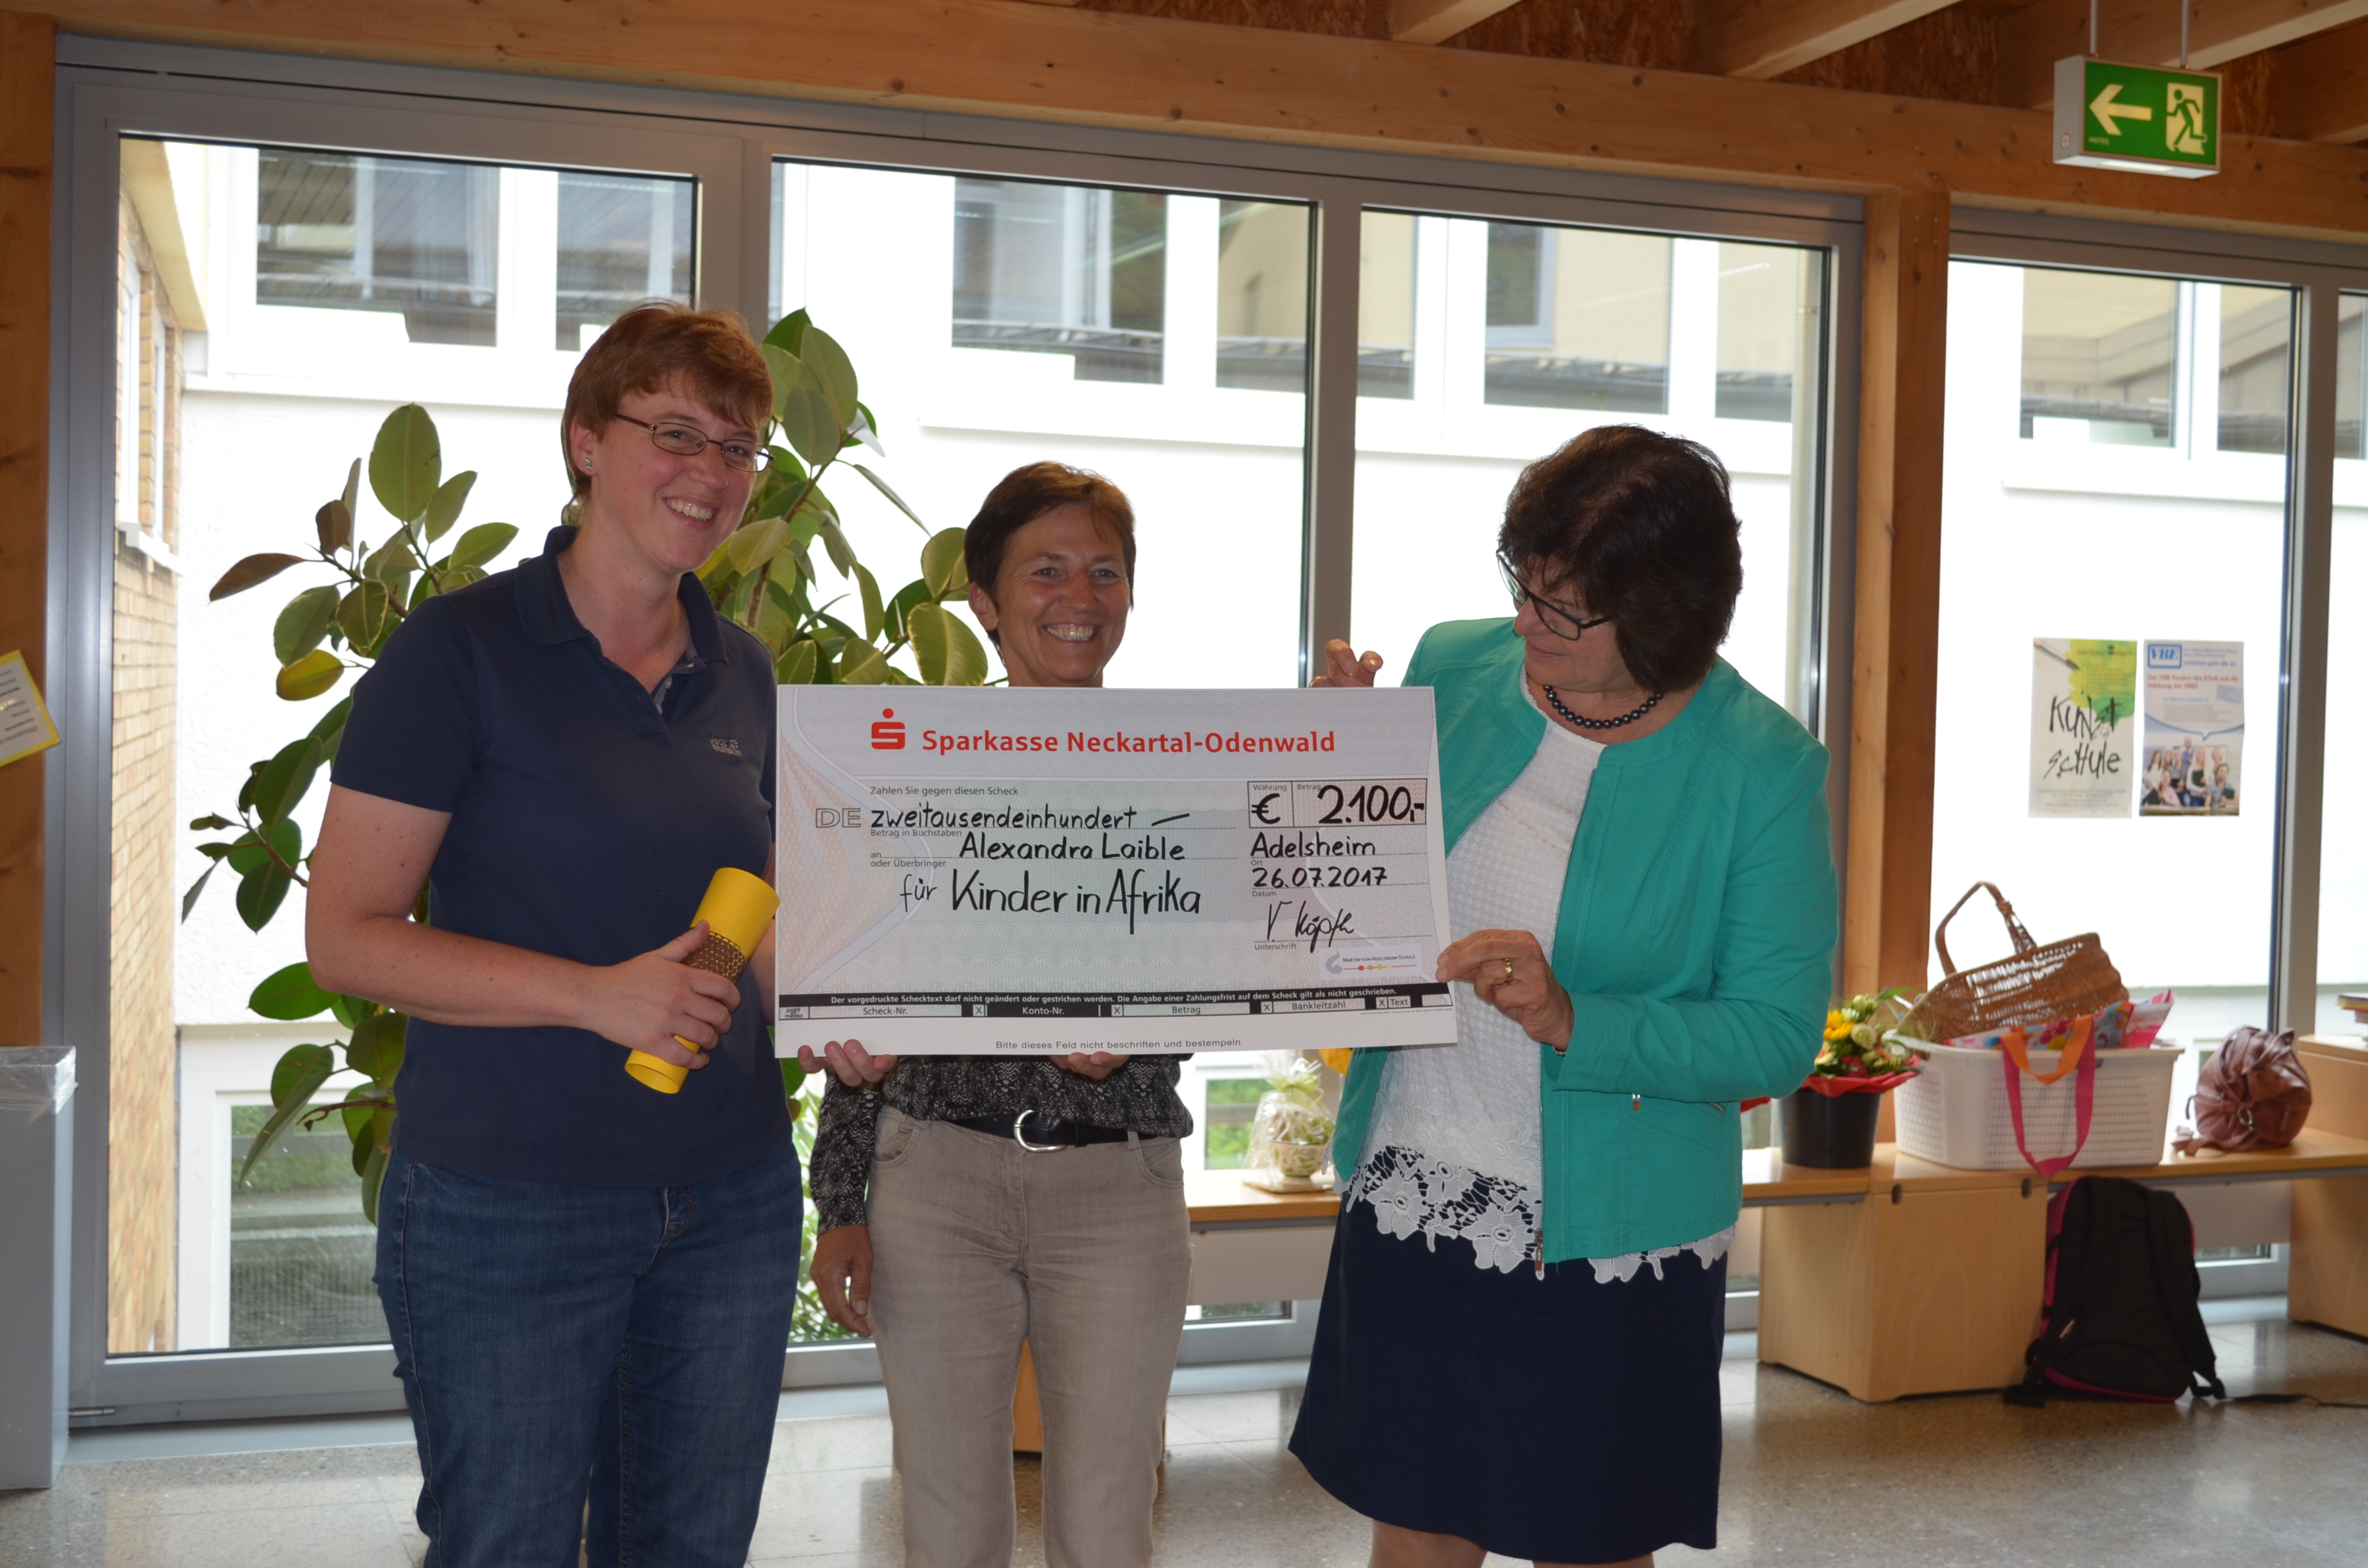 Donation of 2100 € for kids in Africa.
A. Laible, M. Huth, V. Köpfle